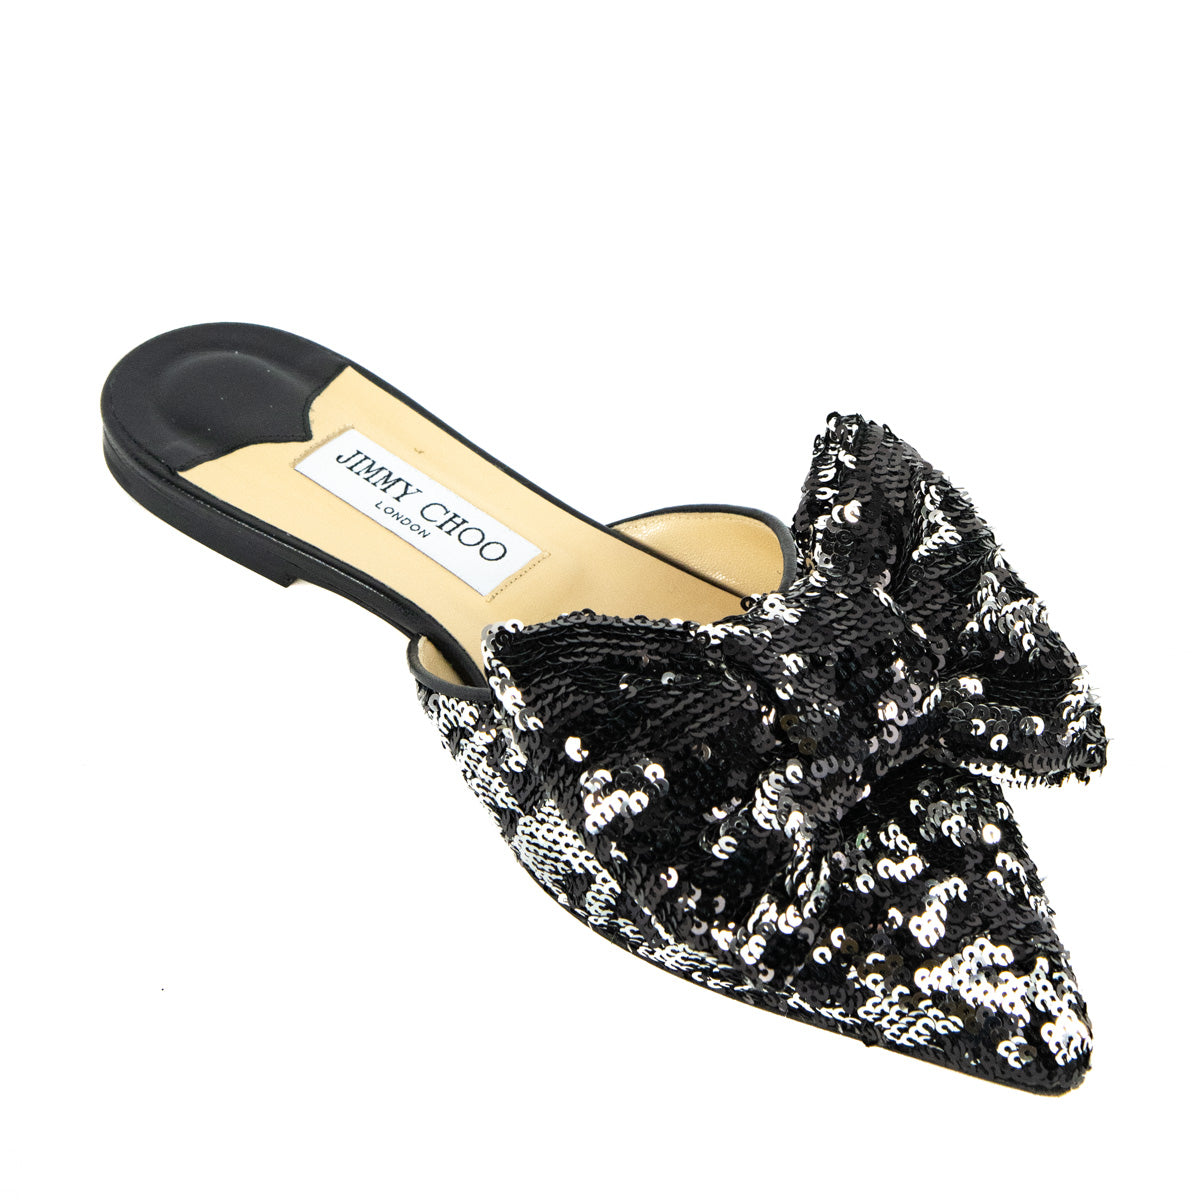 Jimmy Choo Black & Silver Sequin Bow Mules Size US 10 | EU 40 - Love that Bag etc - Preowned Authentic Designer Handbags & Preloved Fashions